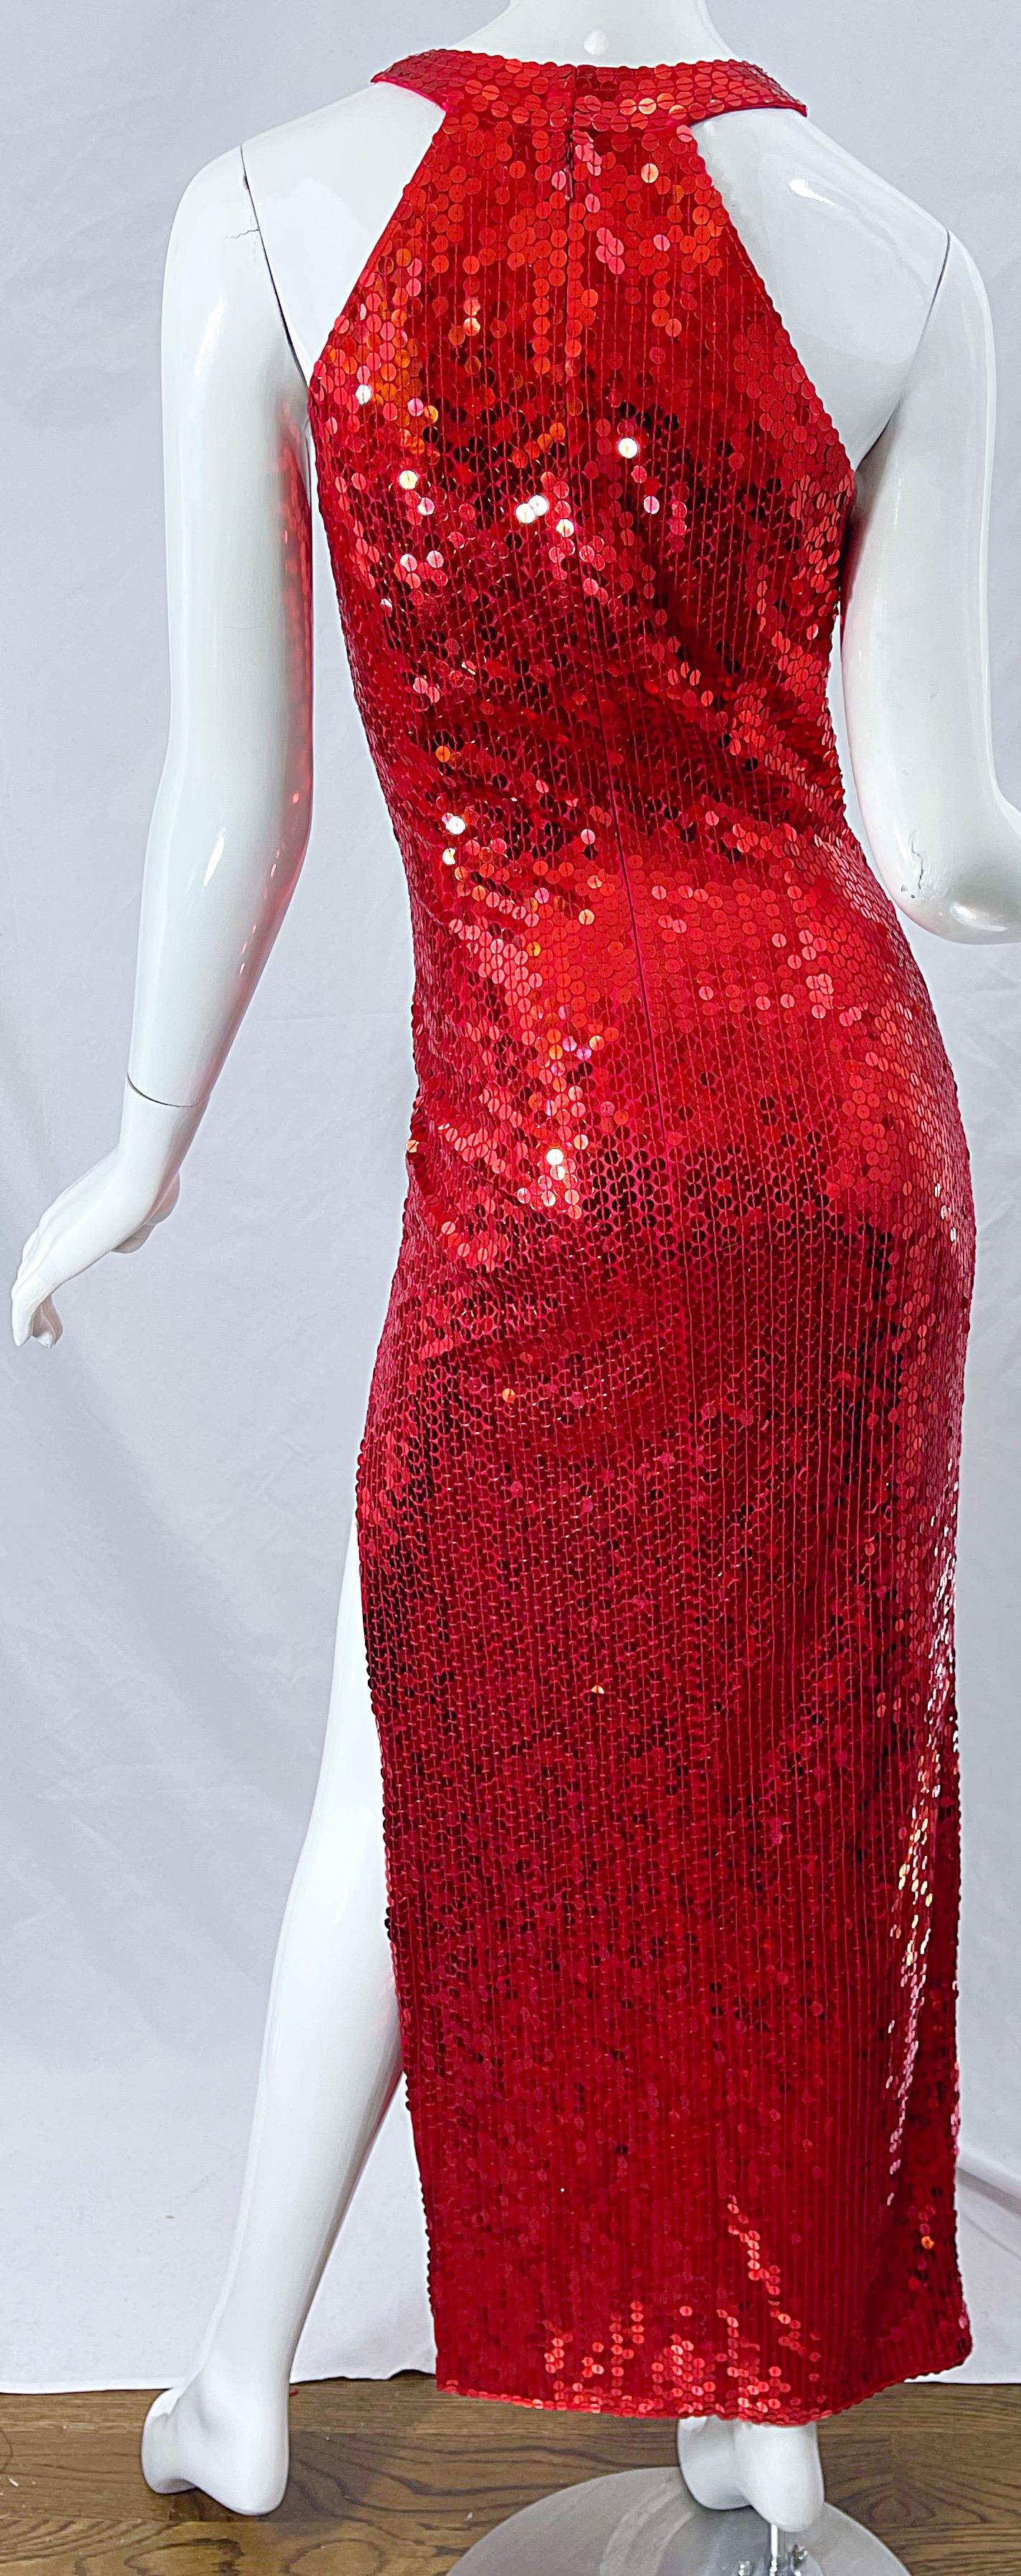 Women's 1990s Lipstick Red Sequin Size 10 Sexy Cut Out Vintage 90s Evening Gown Dress For Sale